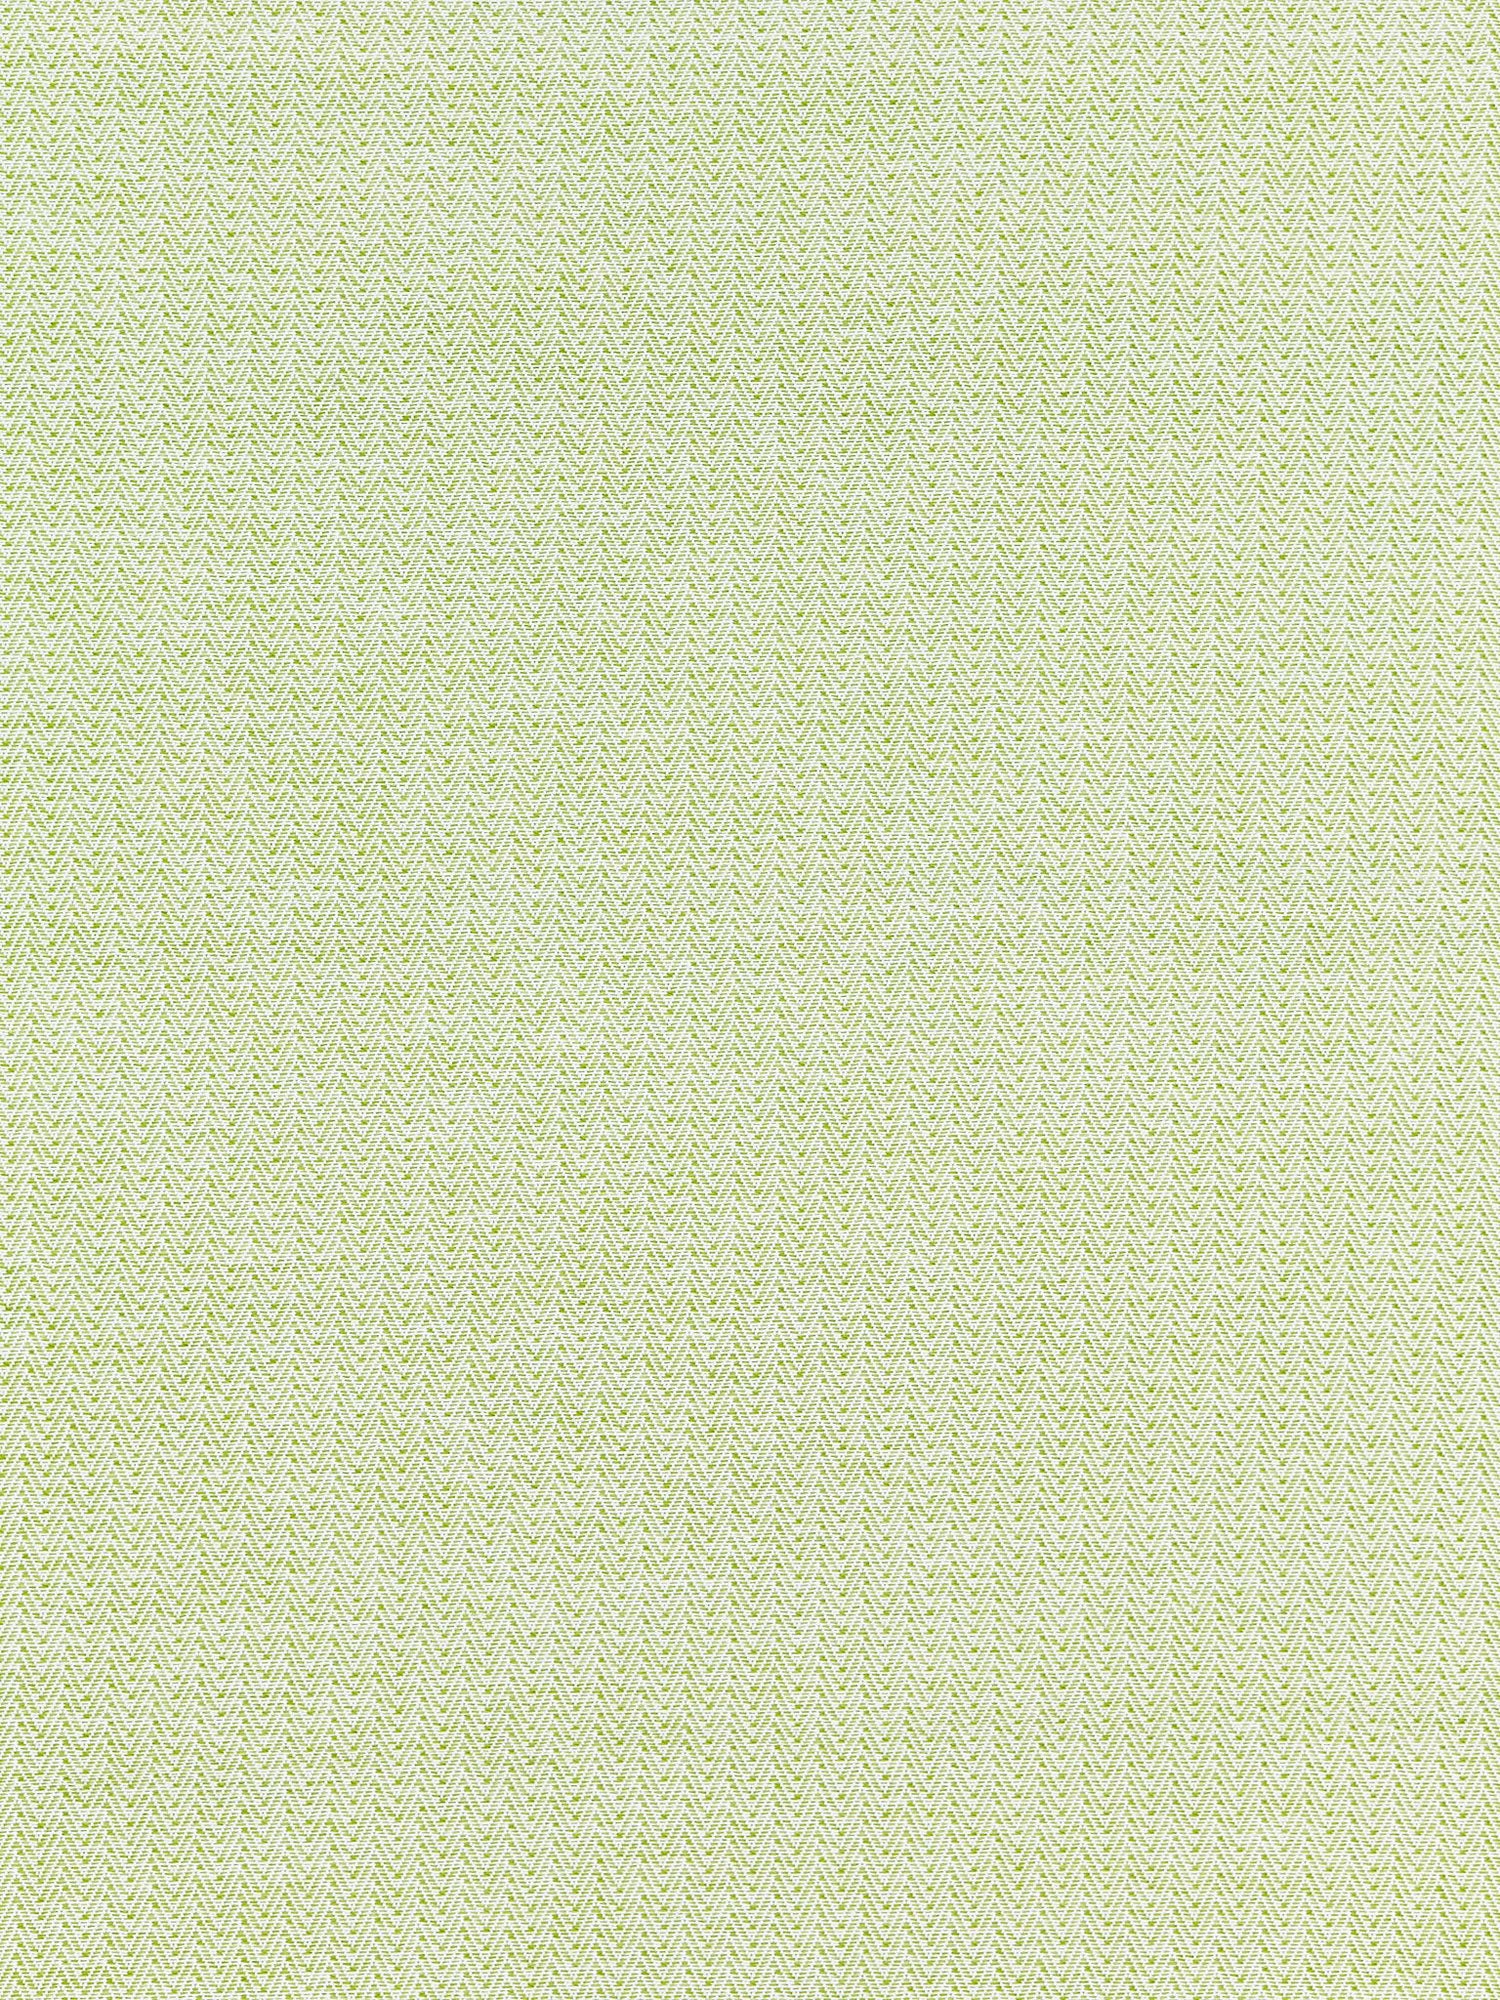 Capri Herringbone fabric in palm color - pattern number SC 000227191 - by Scalamandre in the Scalamandre Fabrics Book 1 collection